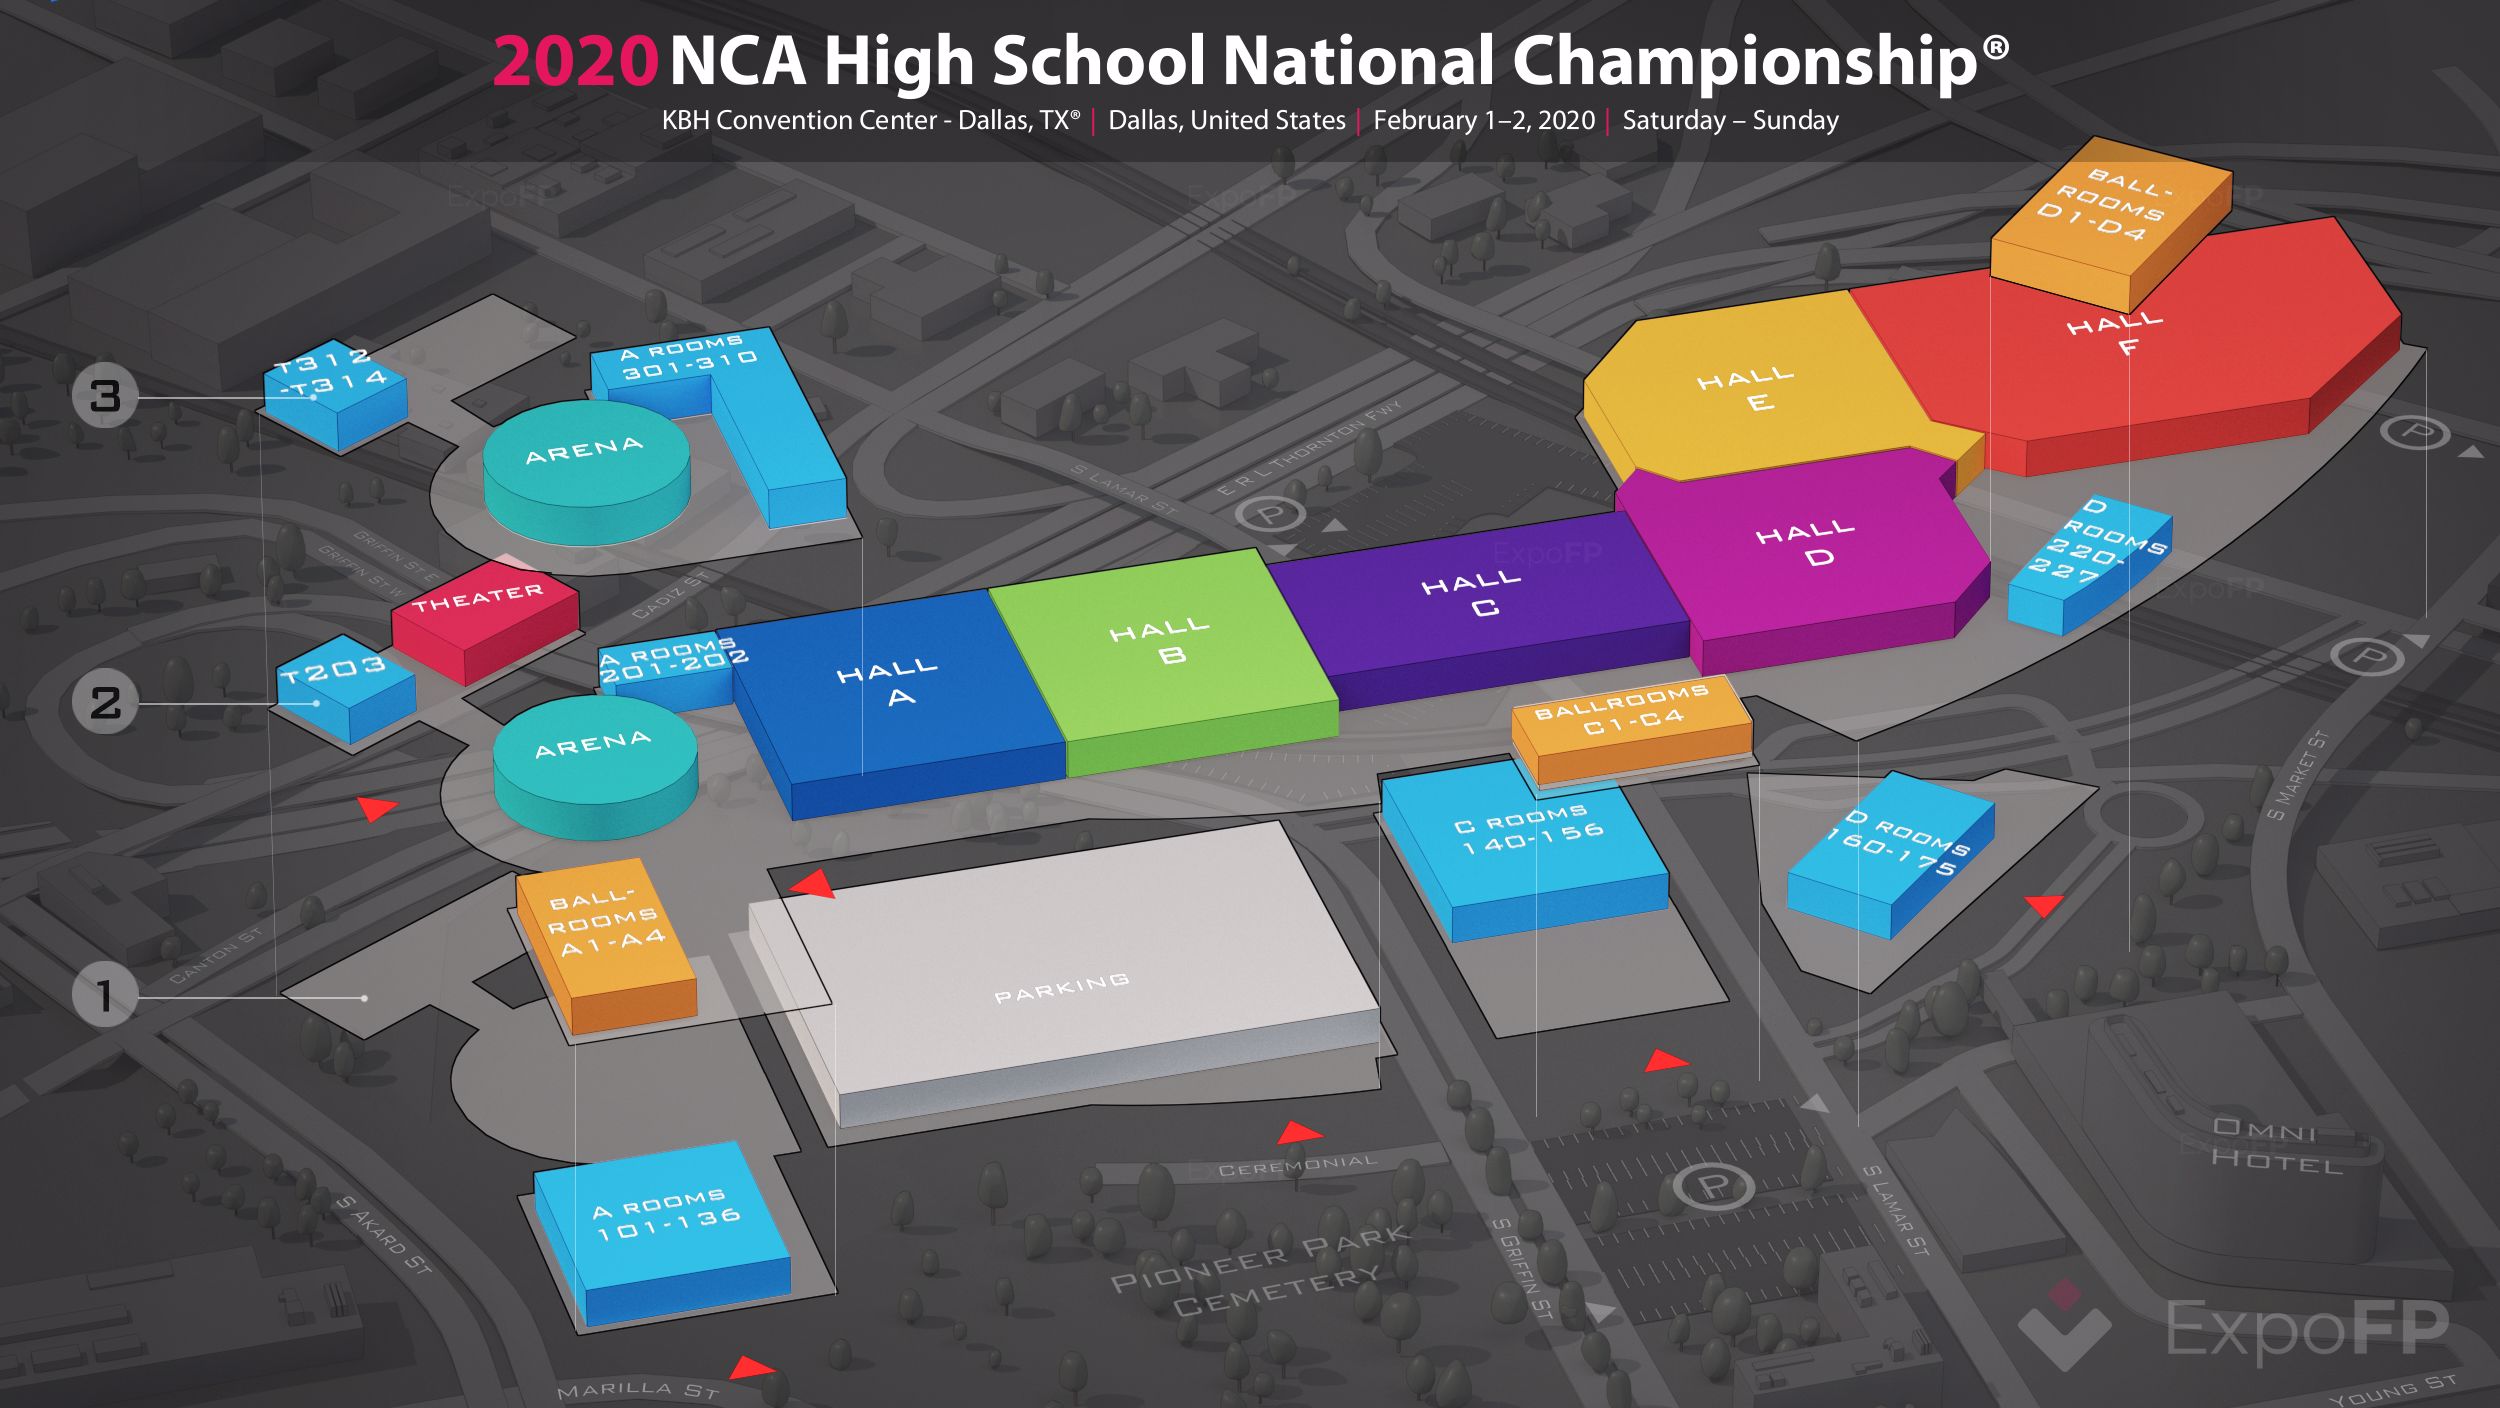 NCA High School National Championship 2020 in KBH Convention Center